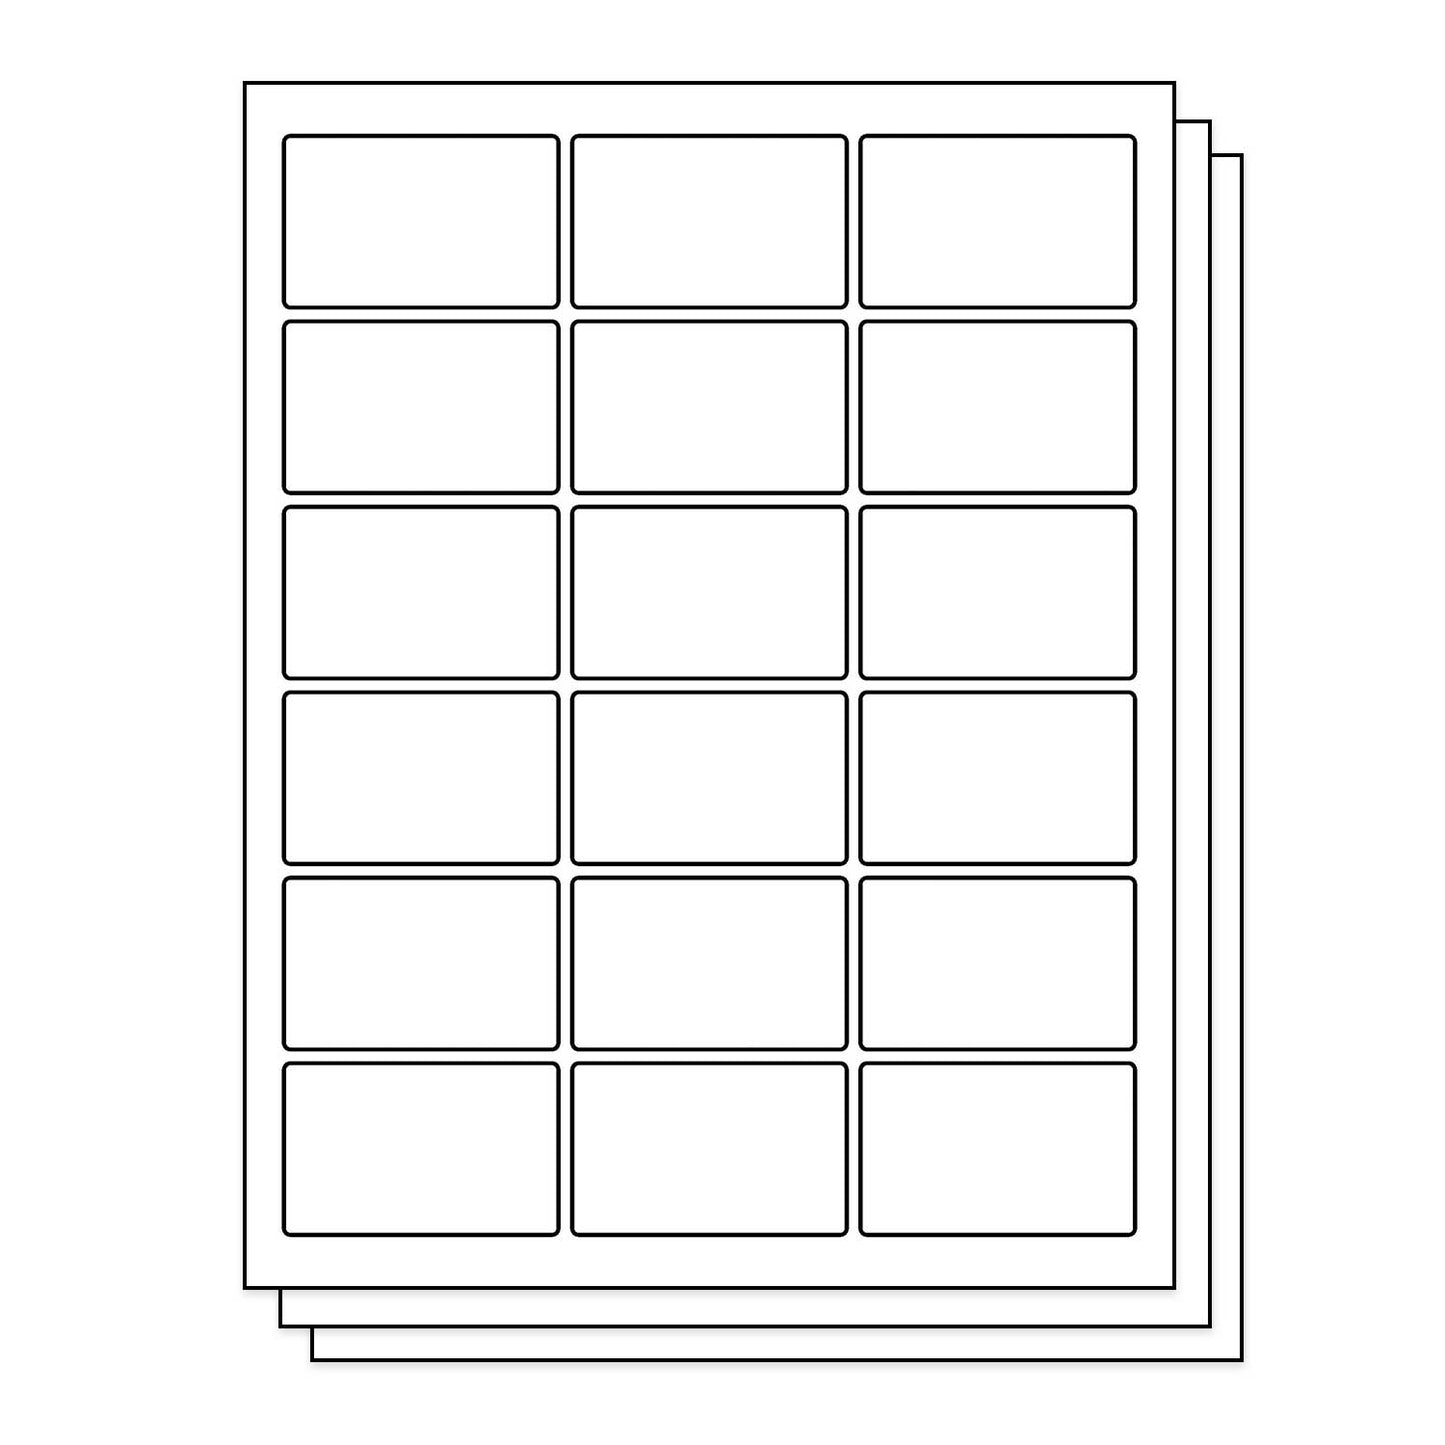 18UP | 2.5 x 1.563 inch Blank  Rectangle Labels - 18 Labels per Sheet